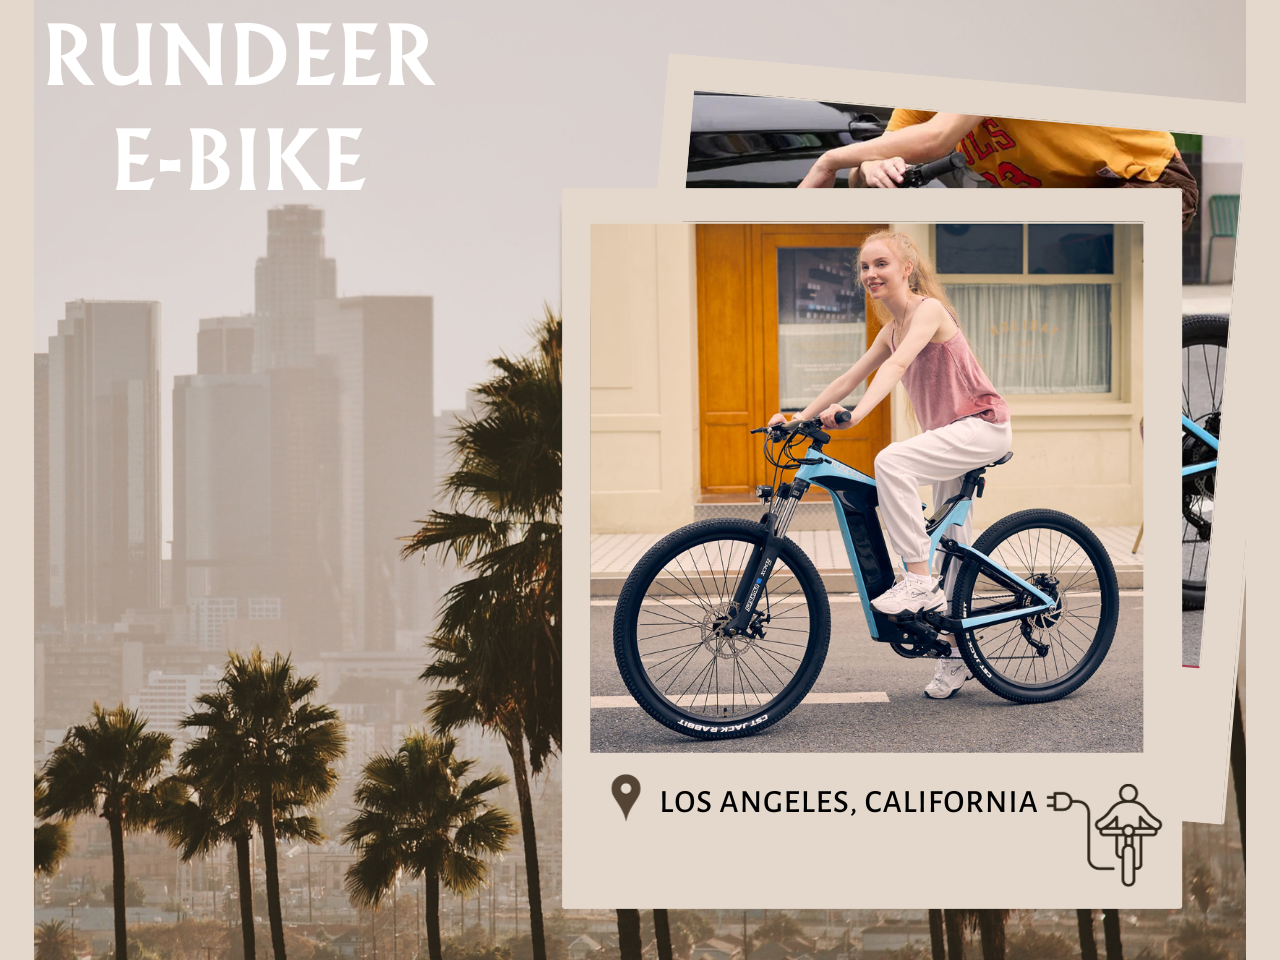 Pedaling-Paradigm-Los-Angeles-The-Center-of-eBike-Exploration Rundeer